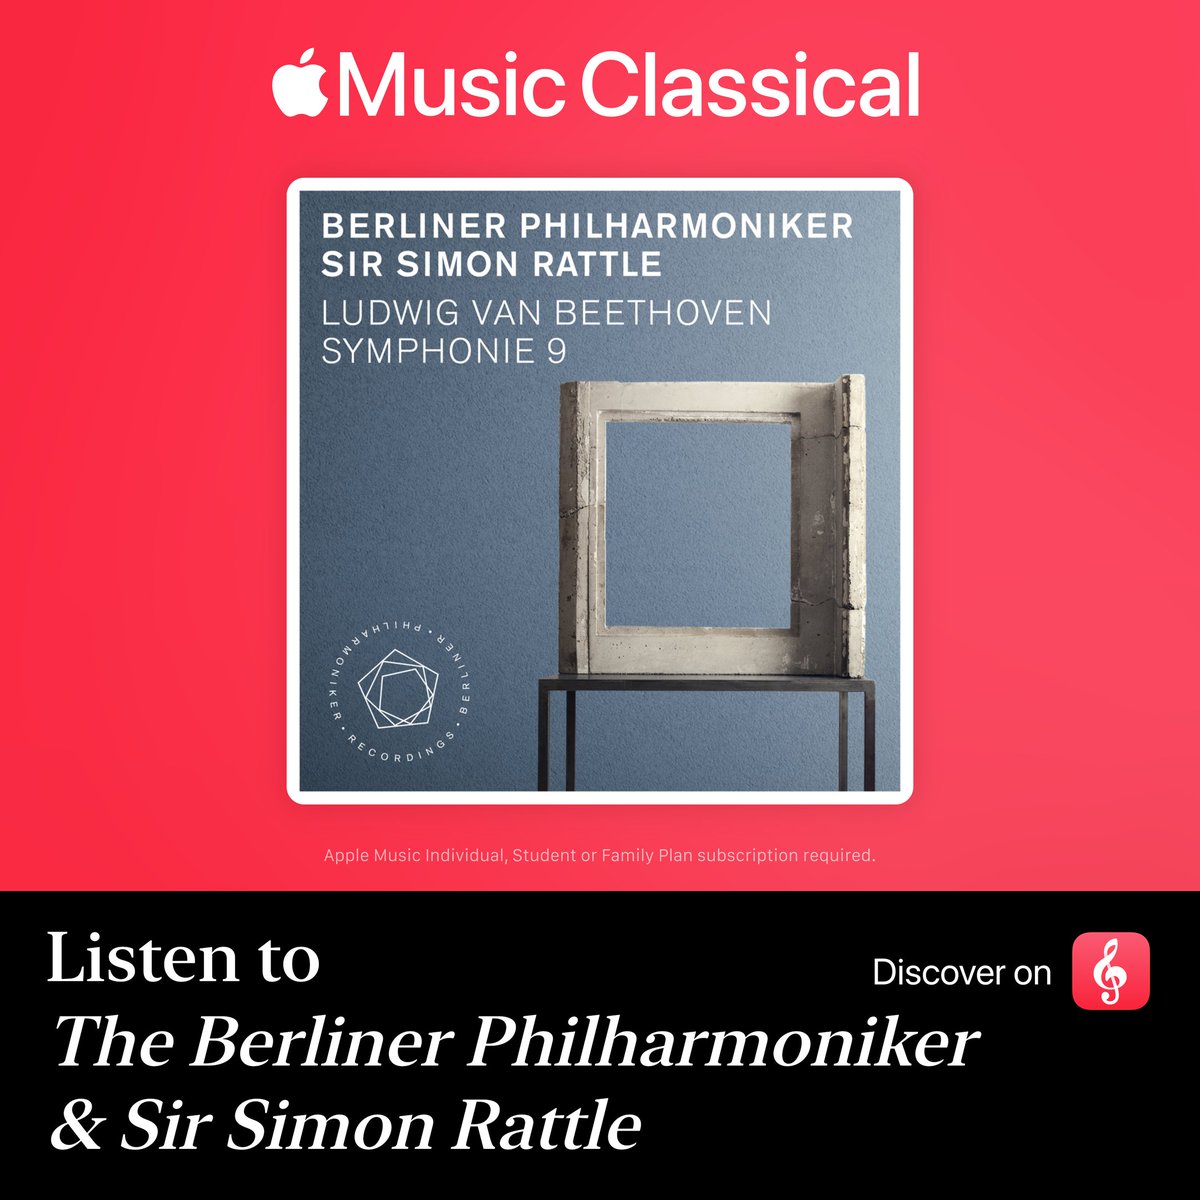 🎶Celebrating 200 years of the joyous magic of Beethoven's Ninth Symphony with Sir Simon Rattle on @AppleClassical! Listen now: classical.music.apple.com/nl/album/17439… #AppleMusicClassical